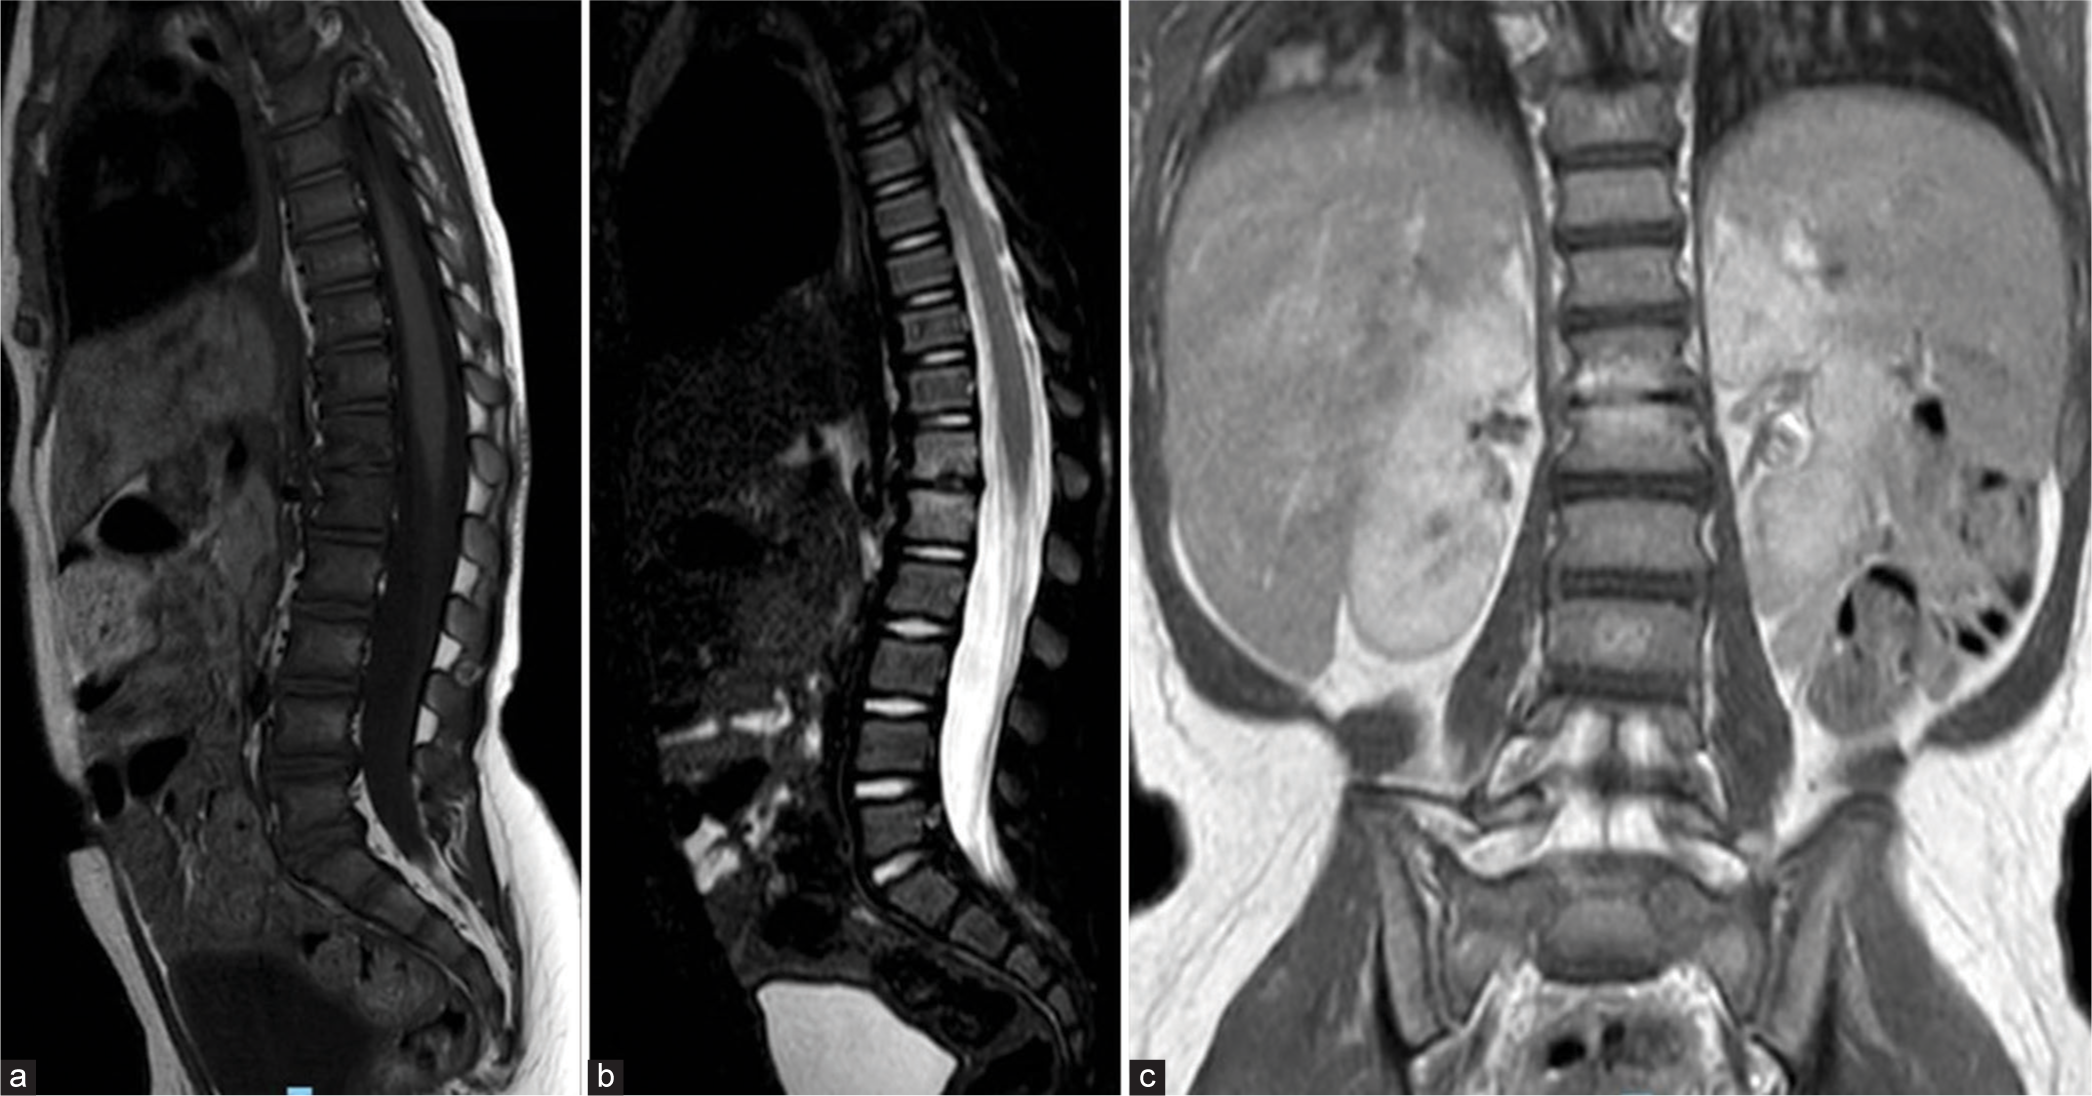 One-month follow-up sagittal (a) T1, (b) T2-weighted, and (c) coronal T1-weighted magnetic resonance images of the lumbar spine reveal hyperintensity centered around the T12–L1 disc space consistent with bone marrow edema and no evidence of paraspinal abscesses, spinal cord compressions or increase in thoracolumbar junction kyphosis.